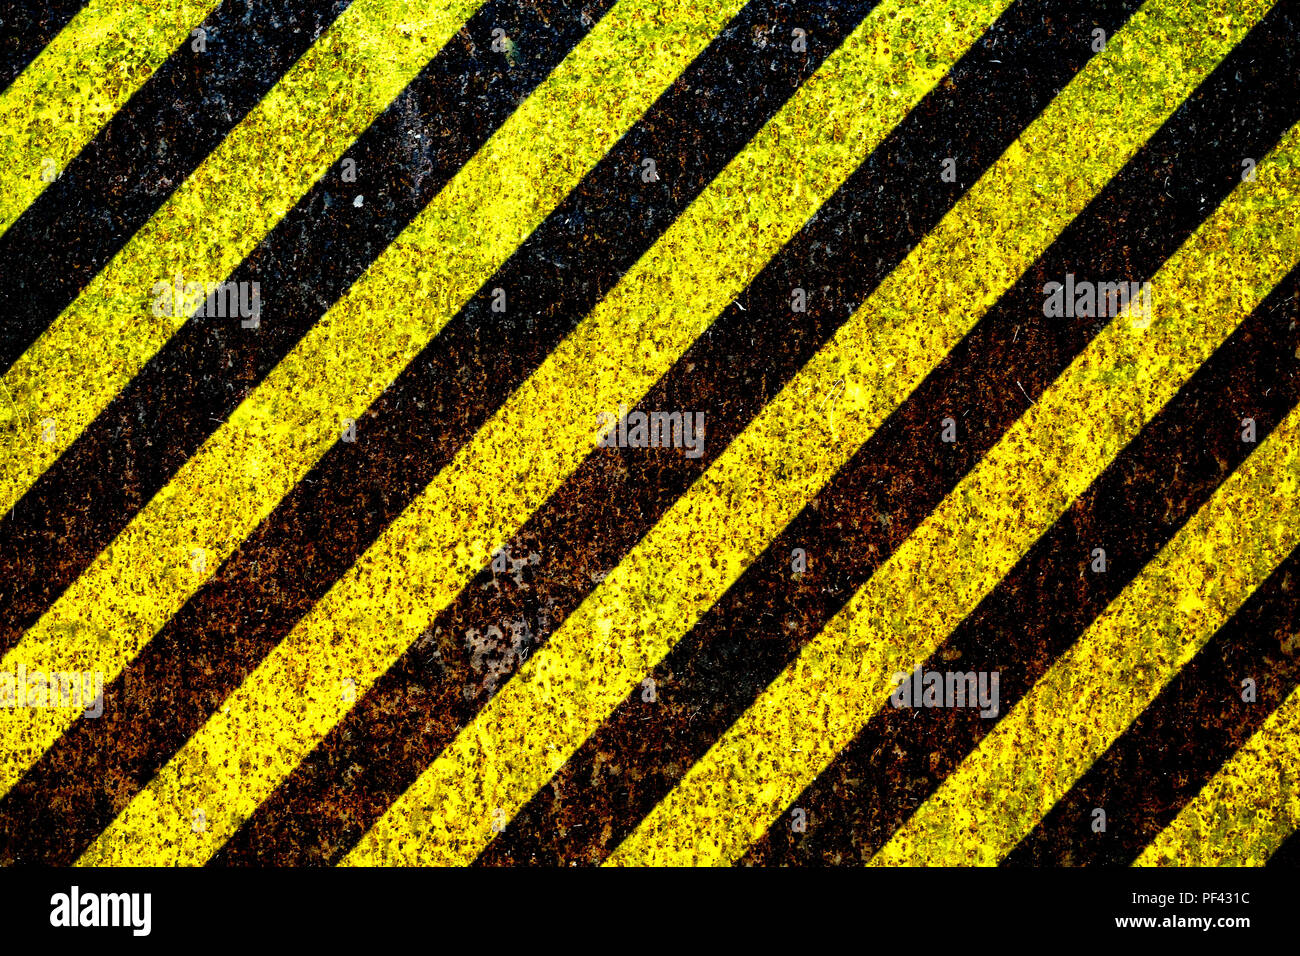 Warning sign yellow and black stripes painted over rusty metal plate as texture background. Concept for do not enter the area, caution, danger, hazard Stock Photo